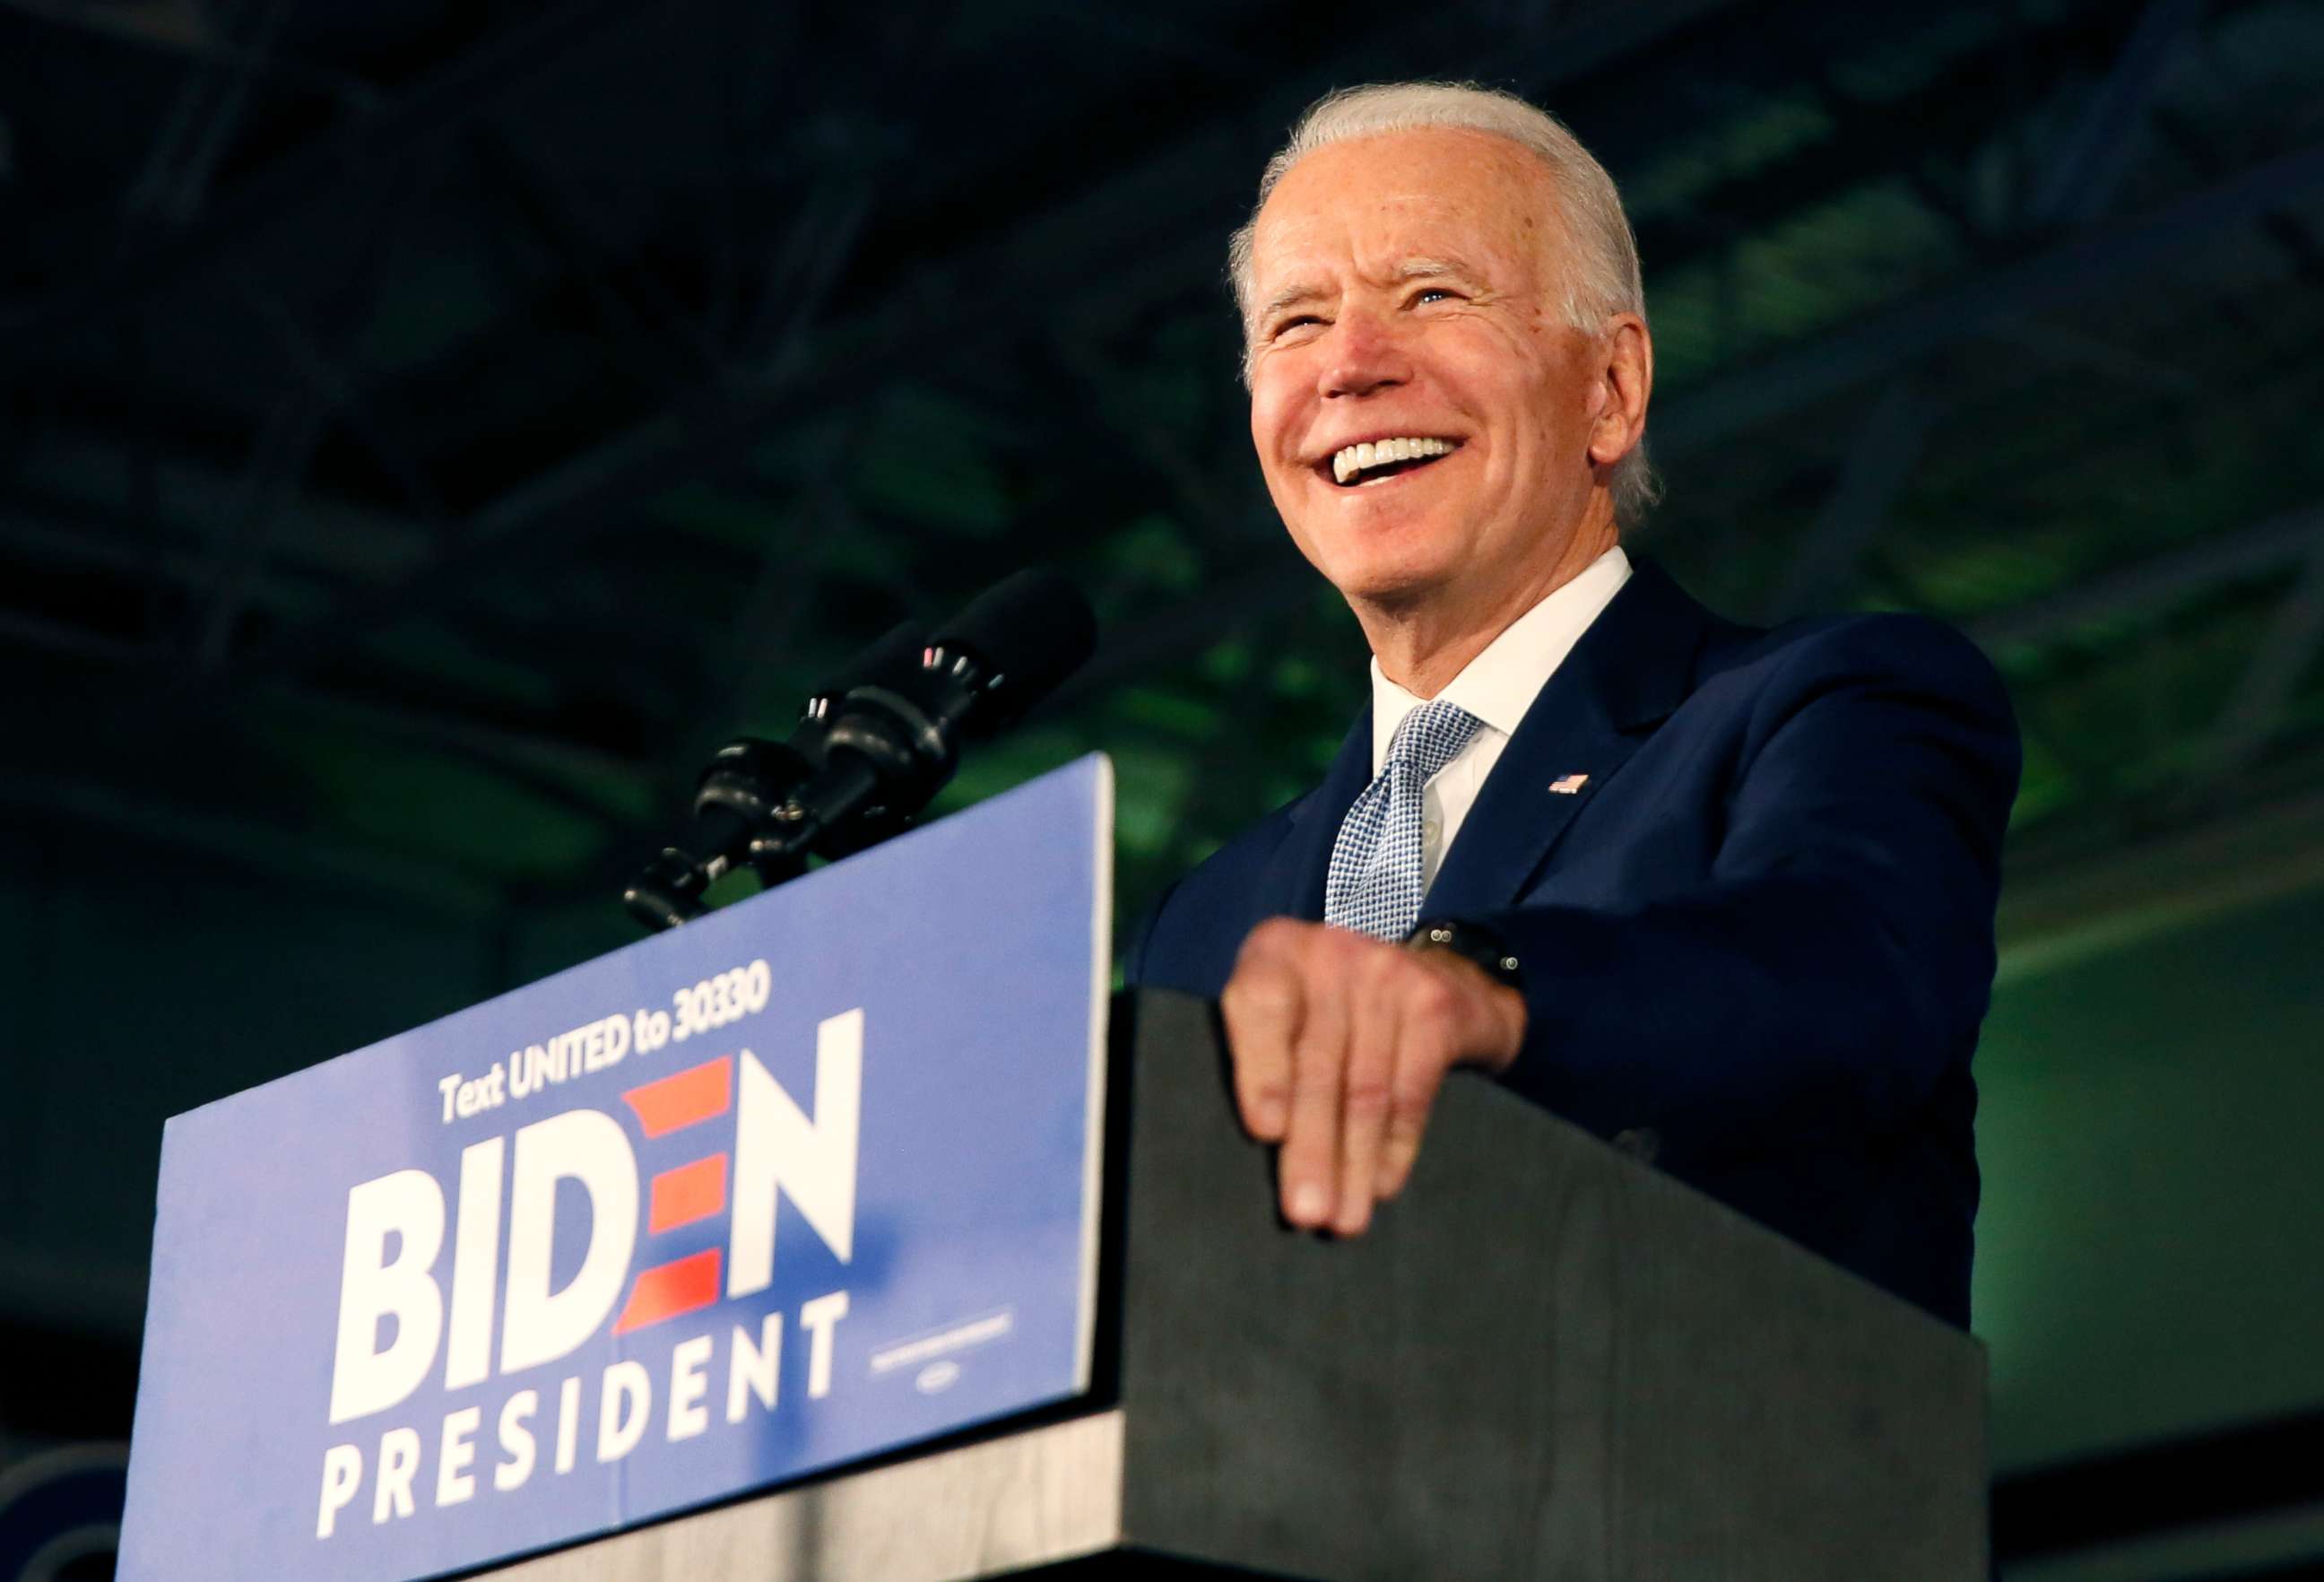 PHOTO: Democratic U.S. presidential candidate and former Vice President Joe Biden addresses supporters at his South Carolina primary night rally in Columbia, South Carolina, Feb. 29, 2020.